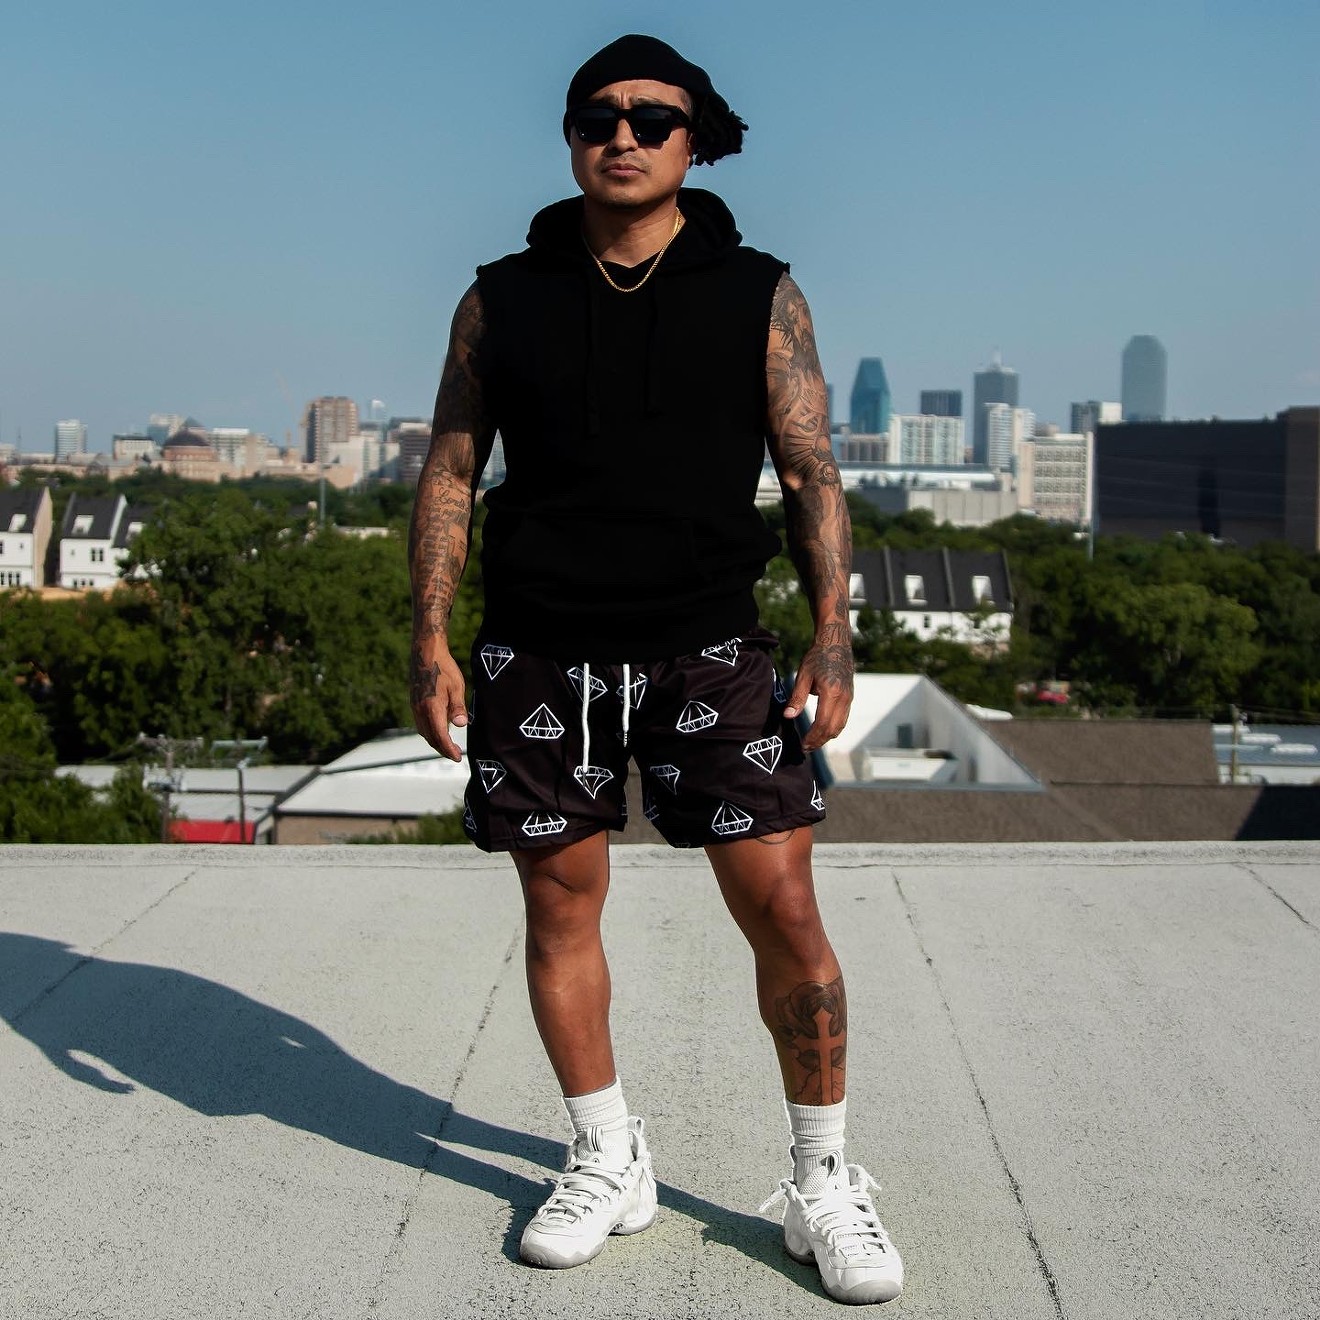 He wears short shorts: why are men showing more leg?, Fashion